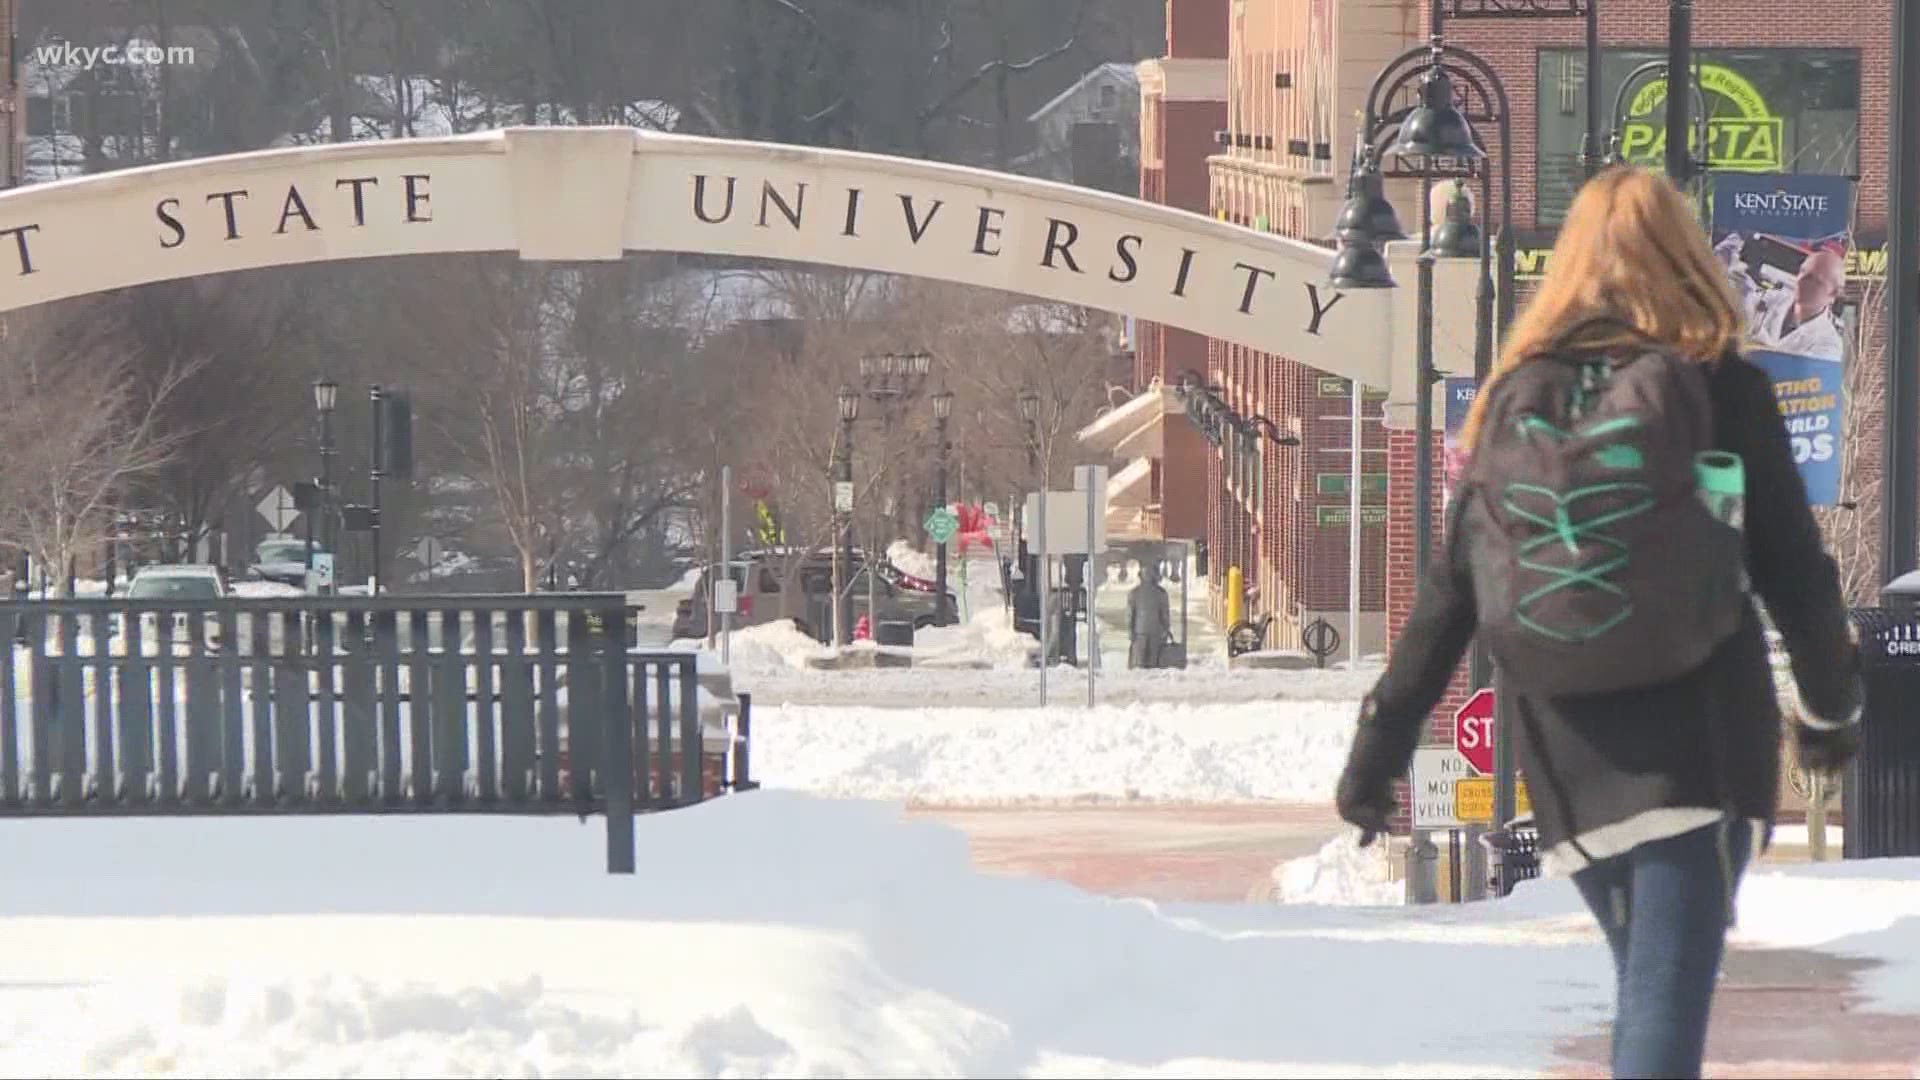 The pandemic is still impacting colleges and universities. 3News' January Keaton spoke with Kent State University's Manfred Van Dulmen about the tough road ahead.